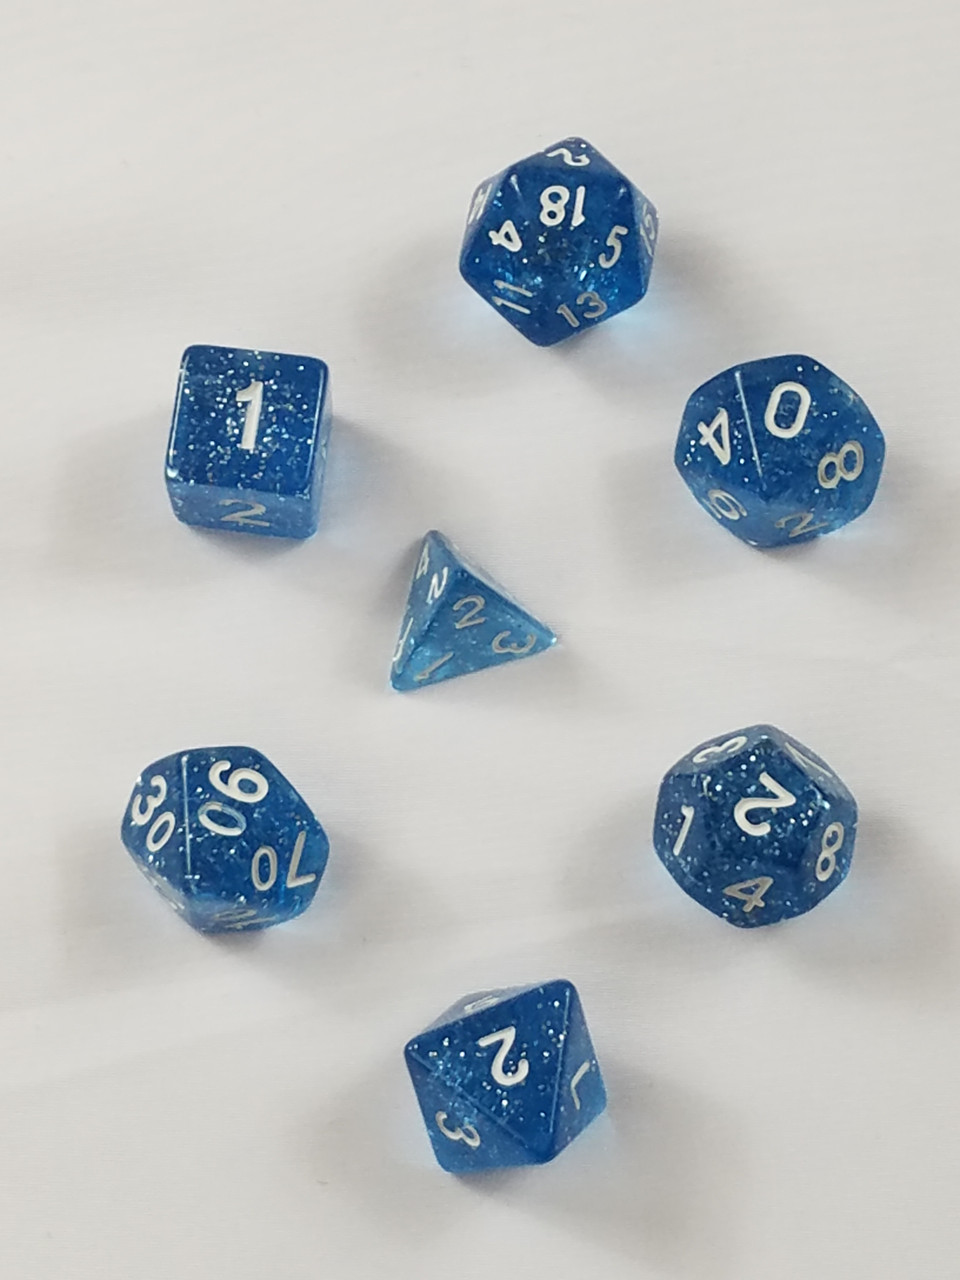 RPG Dice Blue Glitter with White Pips Polyhedral 7 Dice Set New